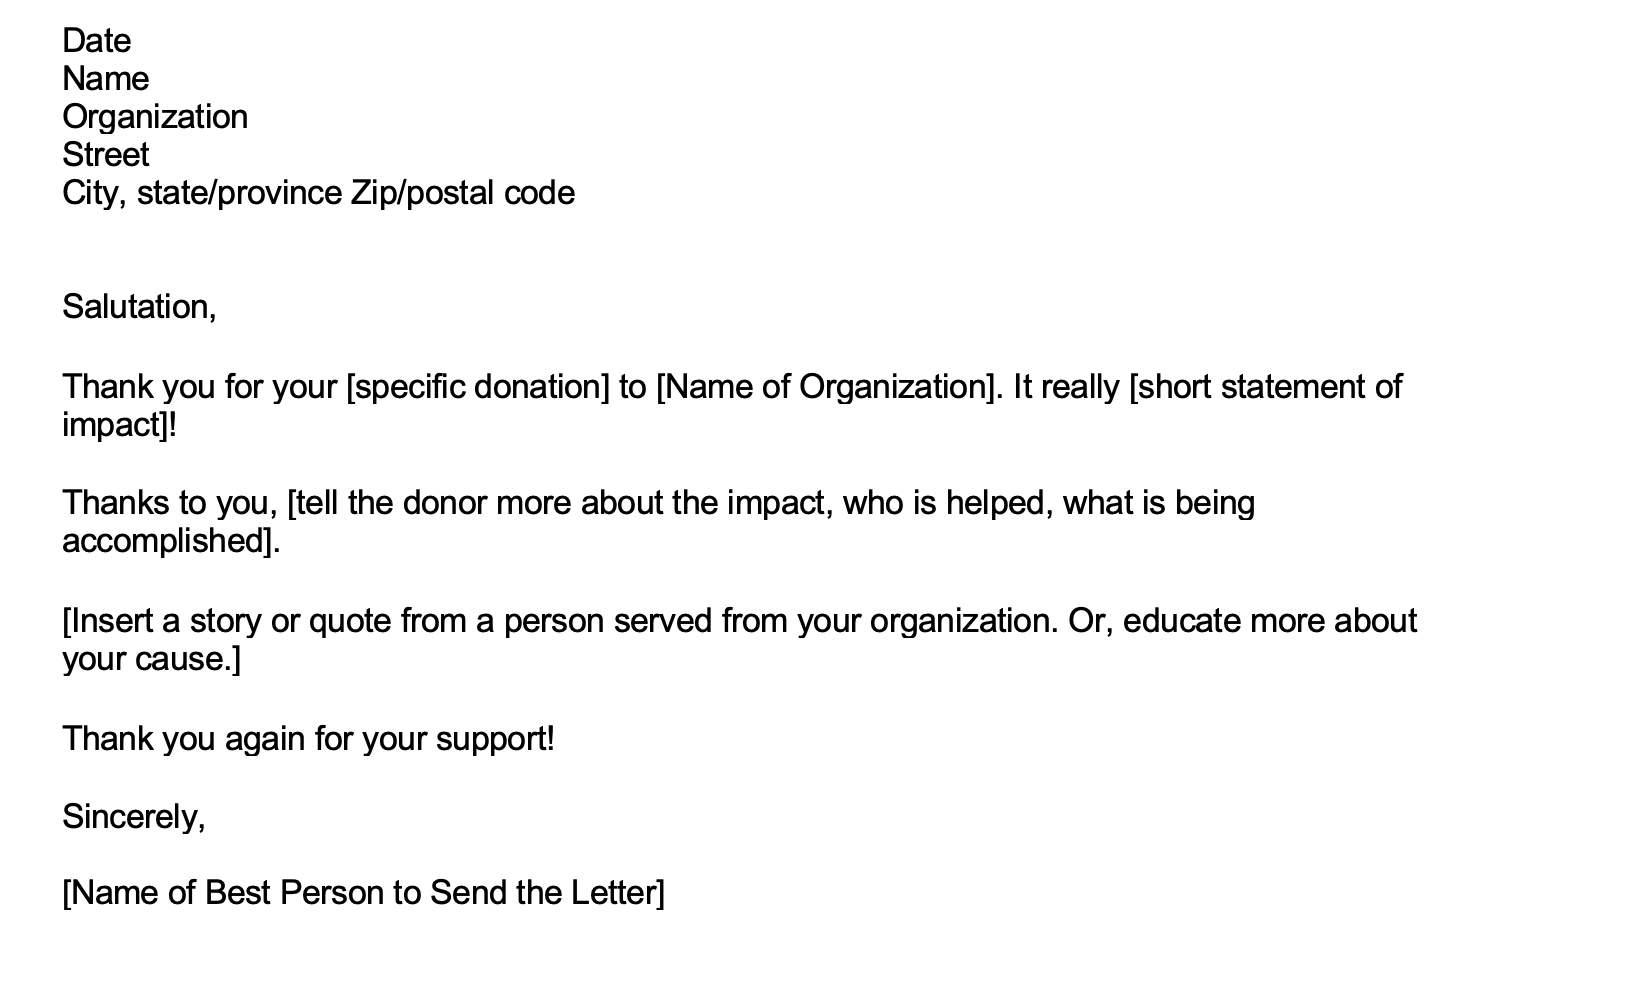 An email template for a donation thank you letter